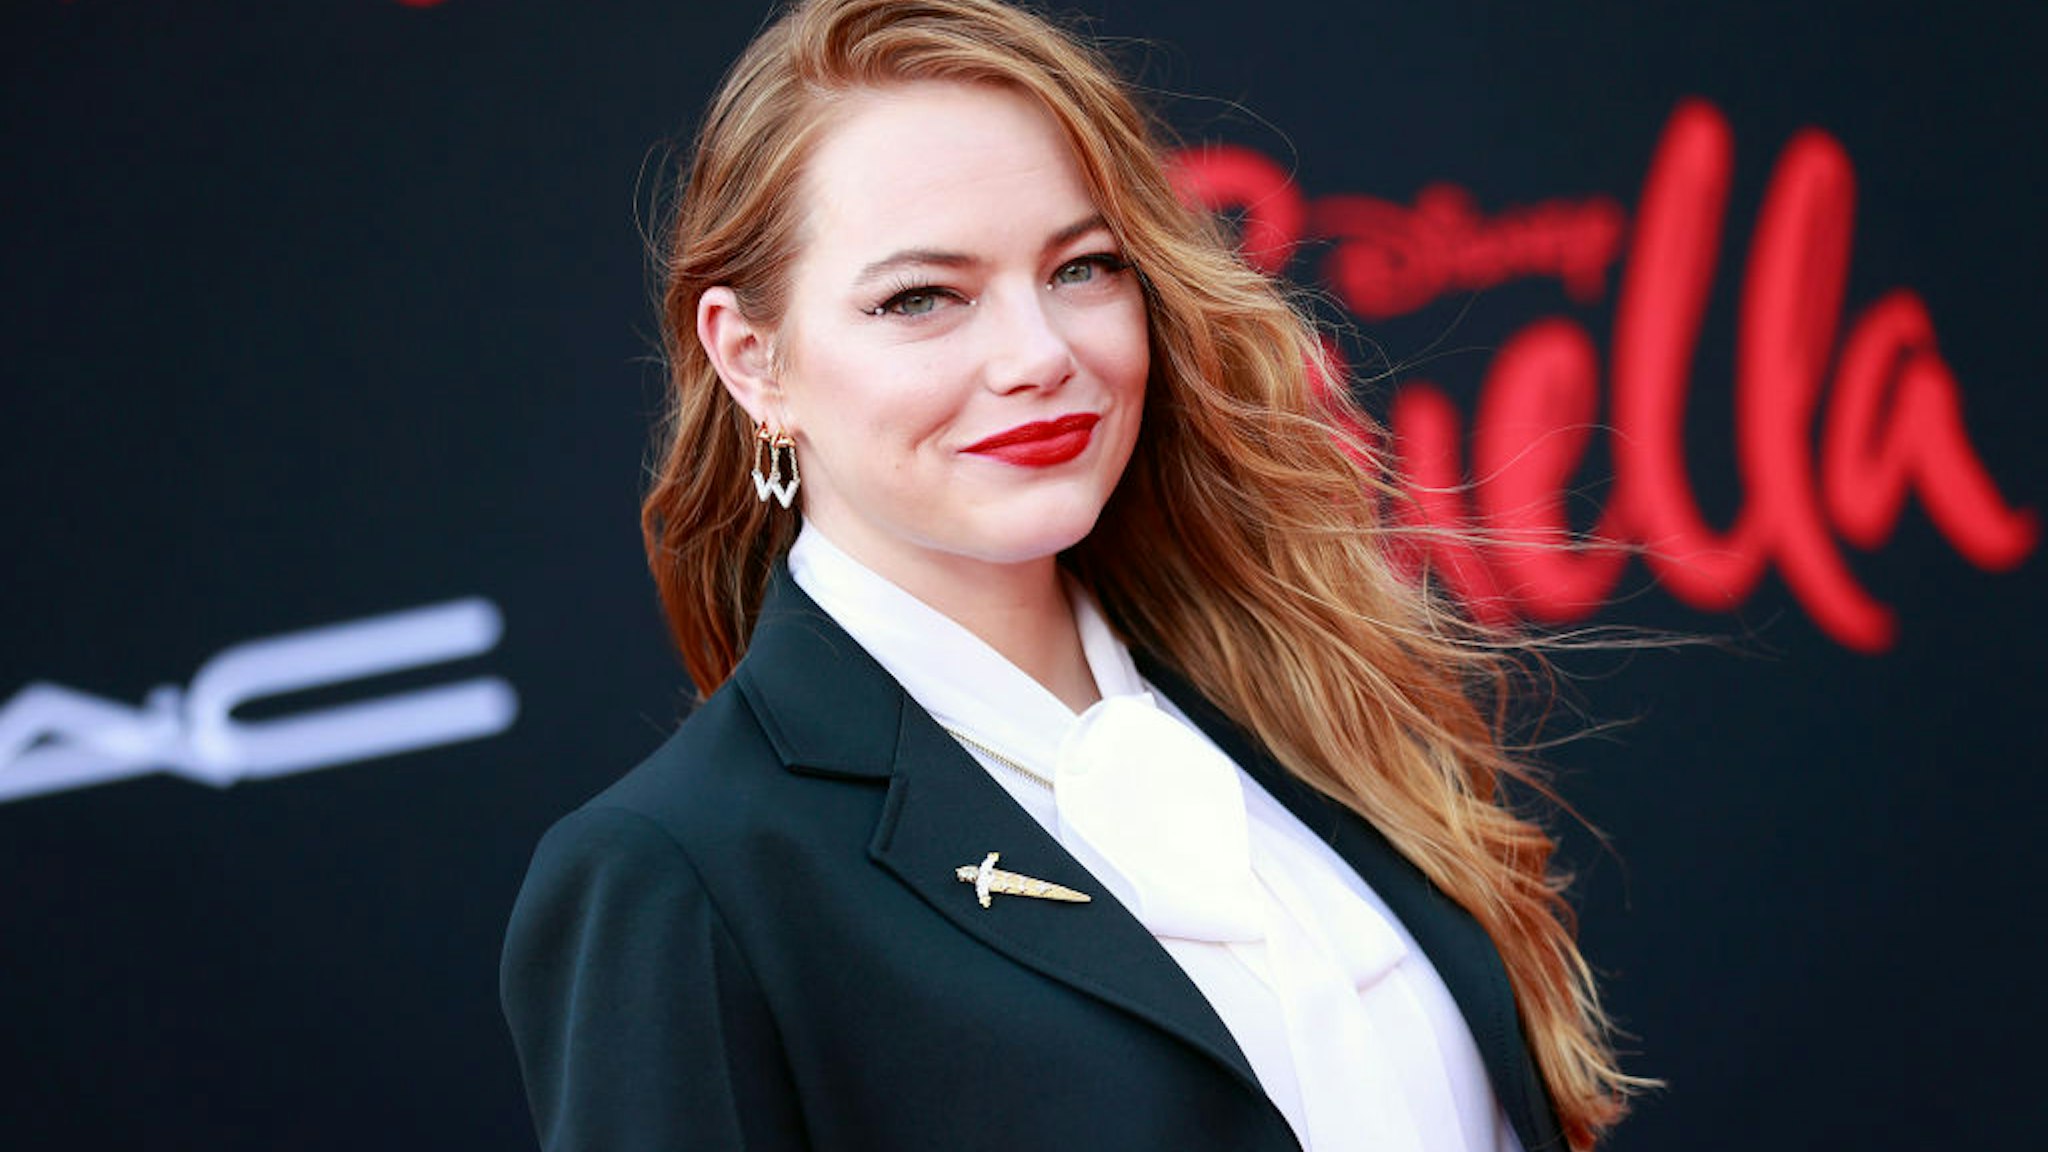 LOS ANGELES, CALIFORNIA - MAY 18: Emma Stone attends the Los Angeles premiere of Disney's "Cruella" at El Capitan Theatre on May 18, 2021 in Los Angeles, California. (Photo by Emma McIntyre/WireImage)